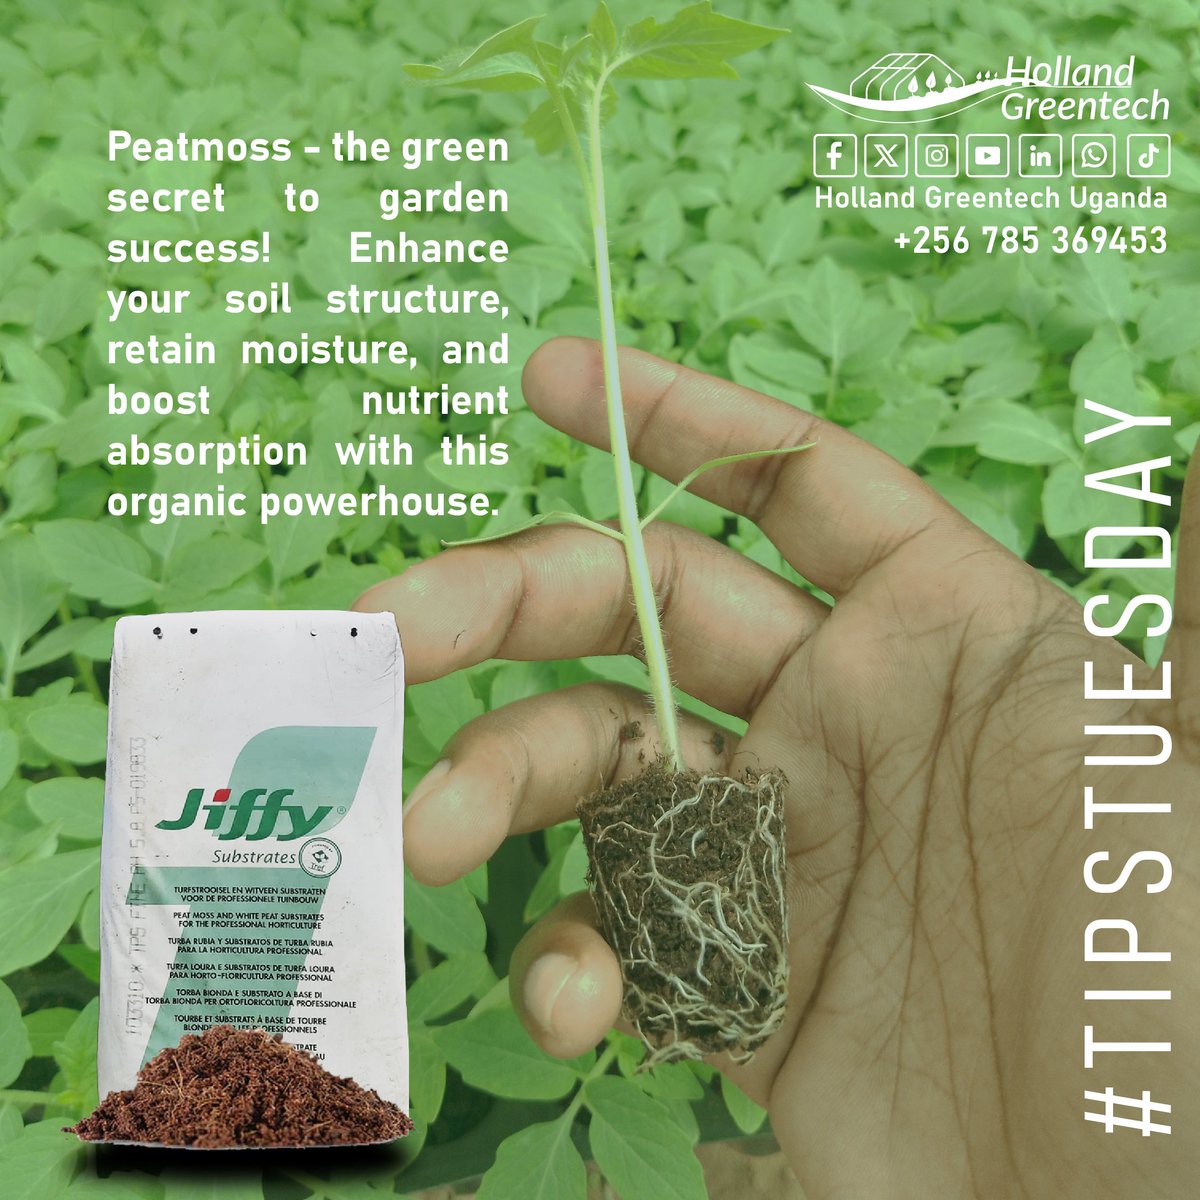 Peatmoss, the unsung hero of gardening! From enhancing soil structure to promoting water retention, peatmoss is a game-changer. #PeatmossMagic #GardenTips #GreenThumbSecrets #agronomy #agriculturetechnology #soilhealth #tipstuesday